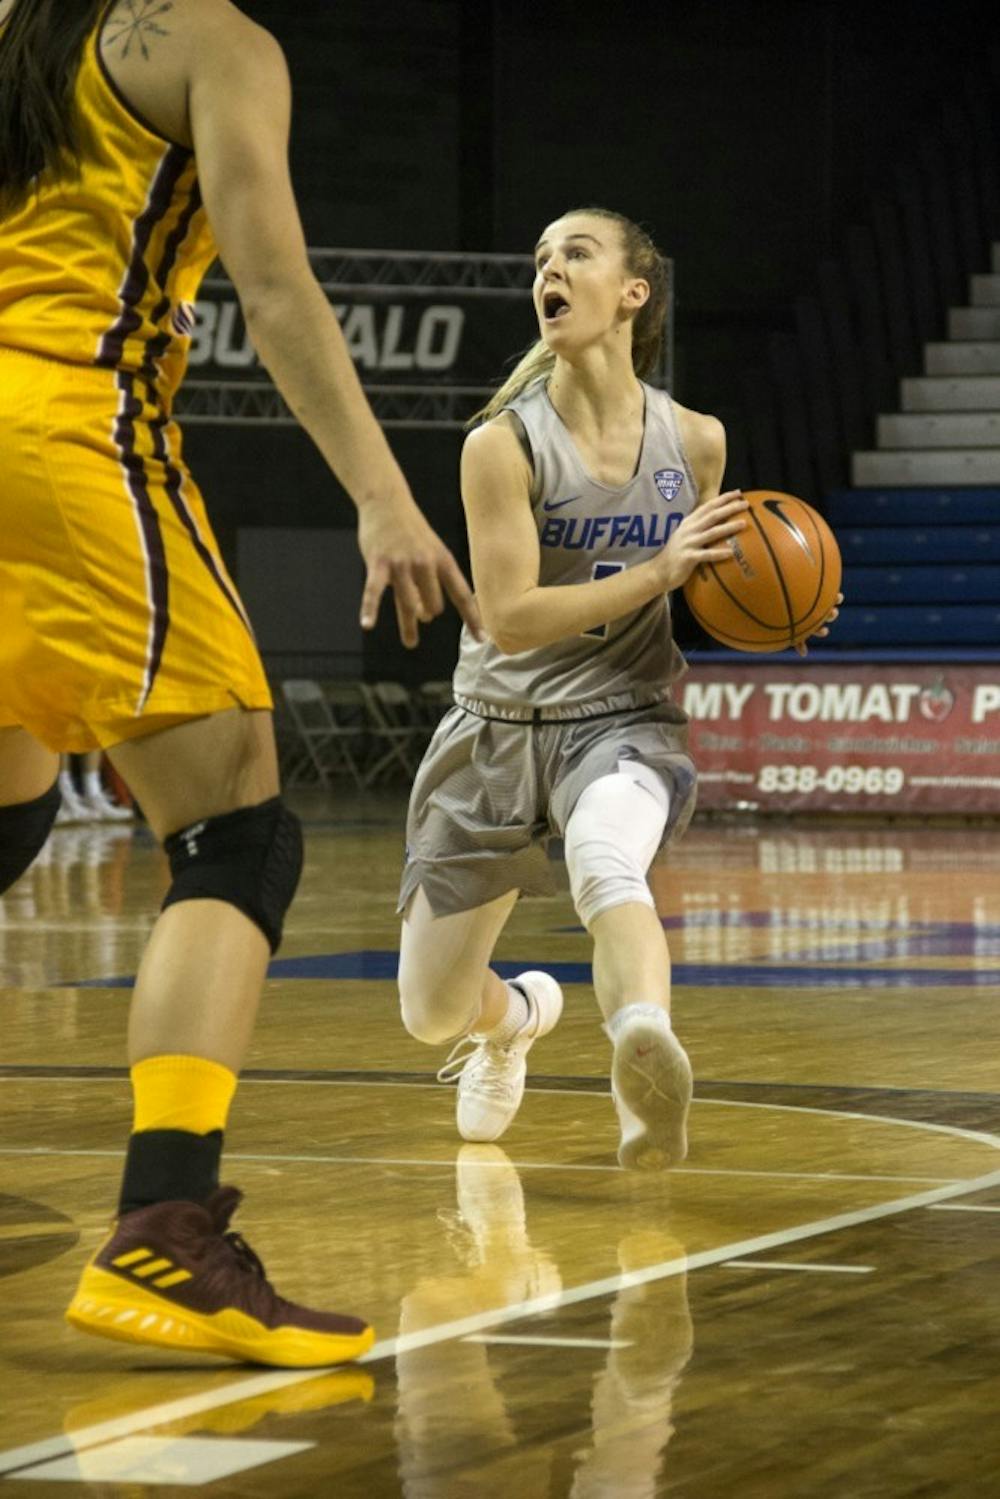 <p>Stephanie Reid picks up her dribble. Reid has played for two professional teams since leaving UB, both in her native country of Australia.</p>